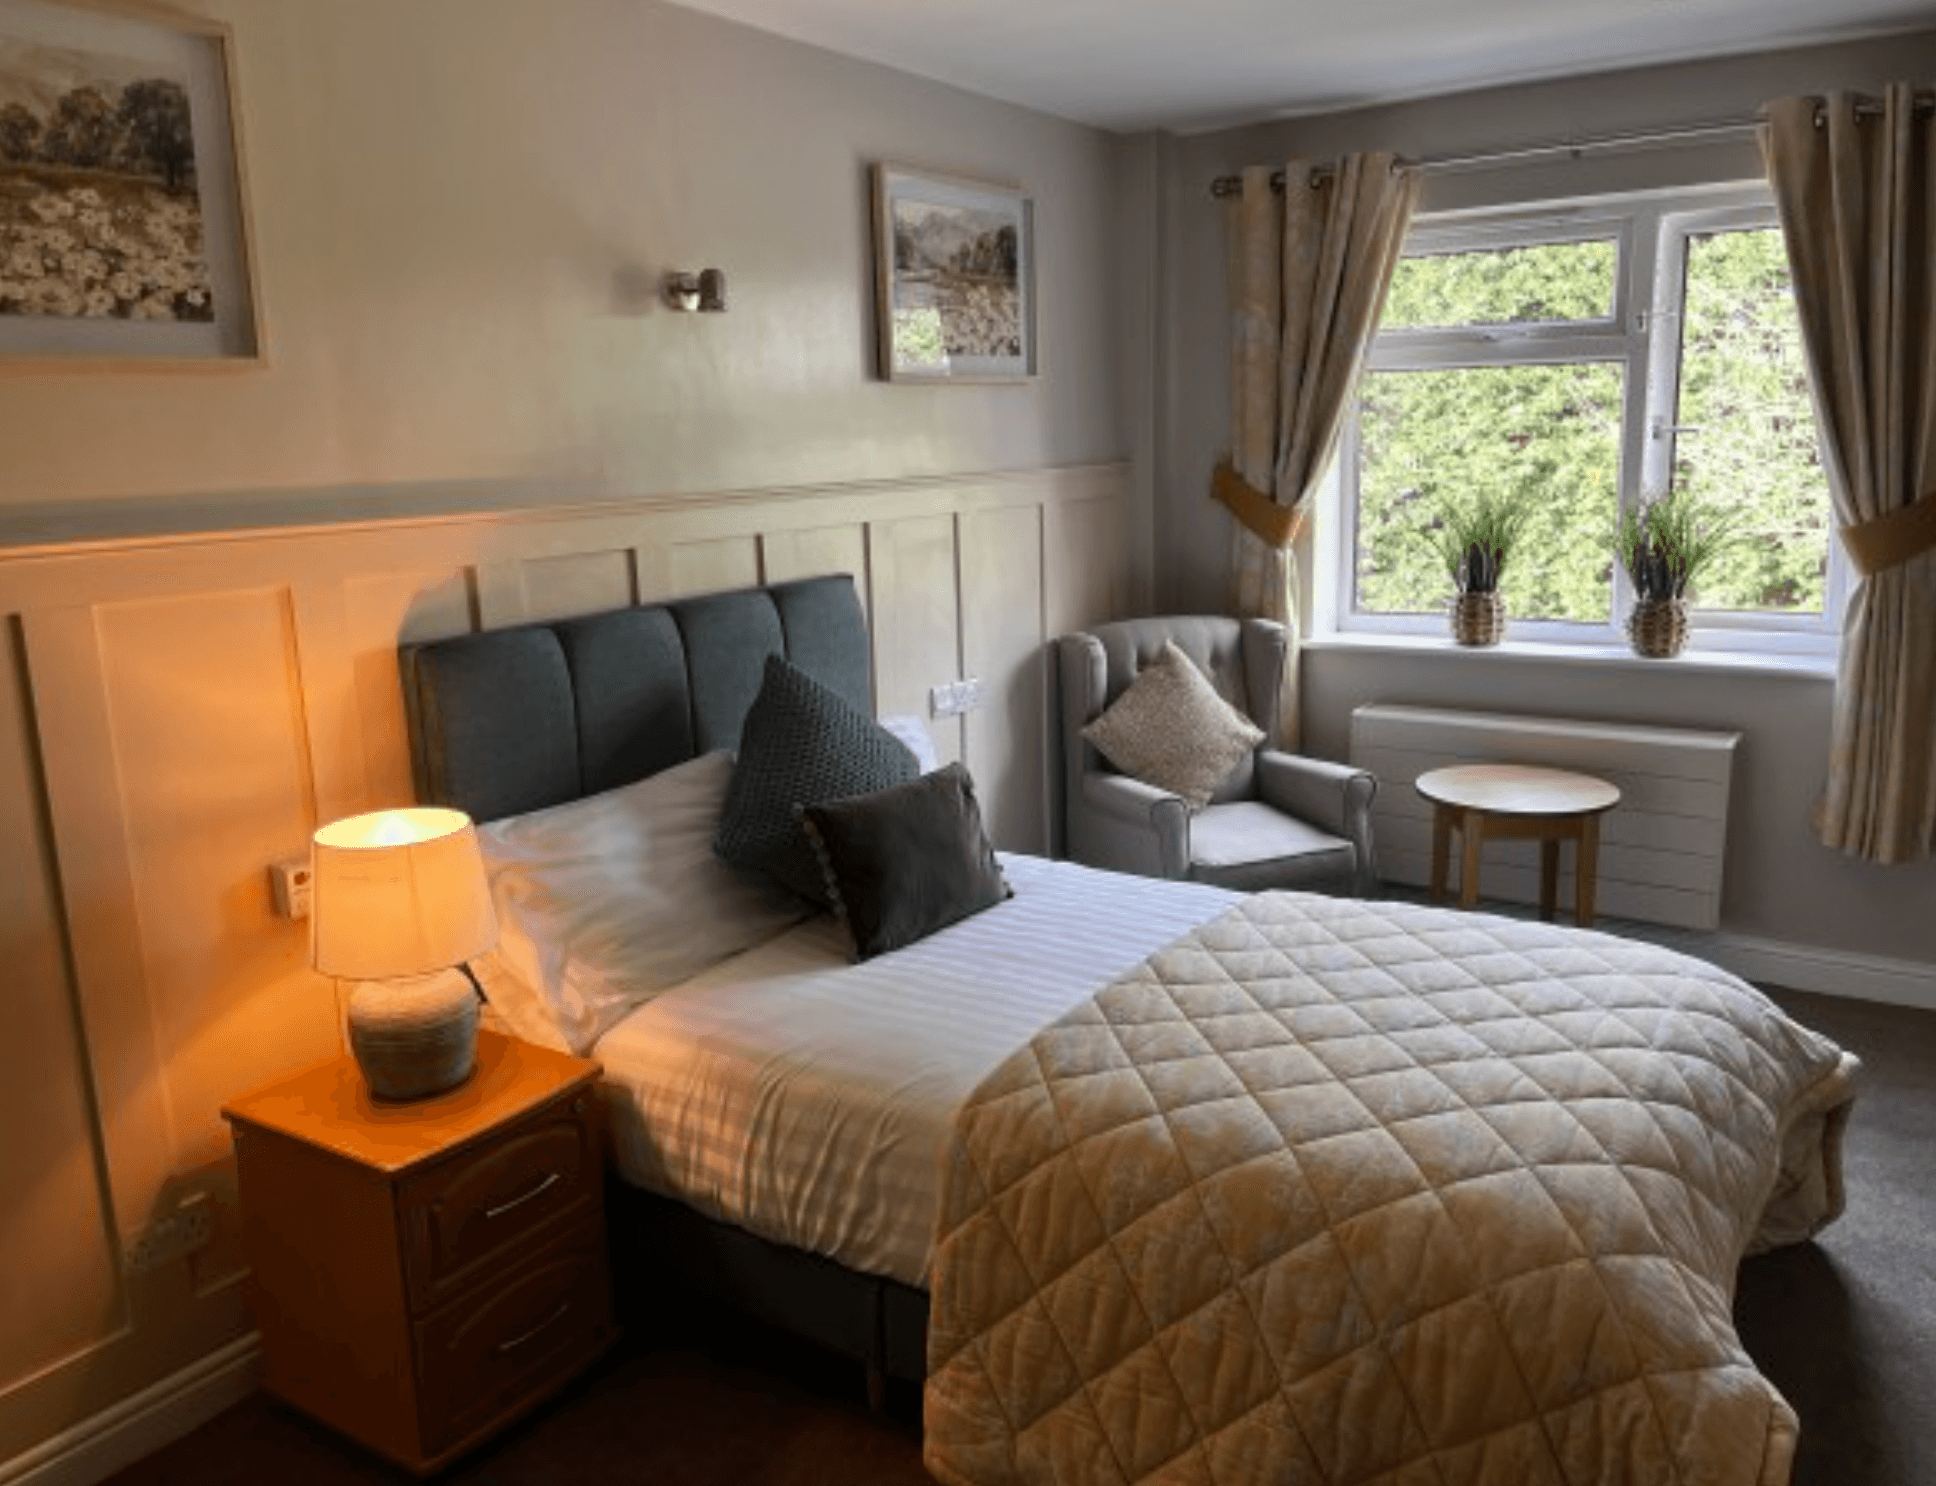 Bedroom of Moorgate Croft care home in Rotherham